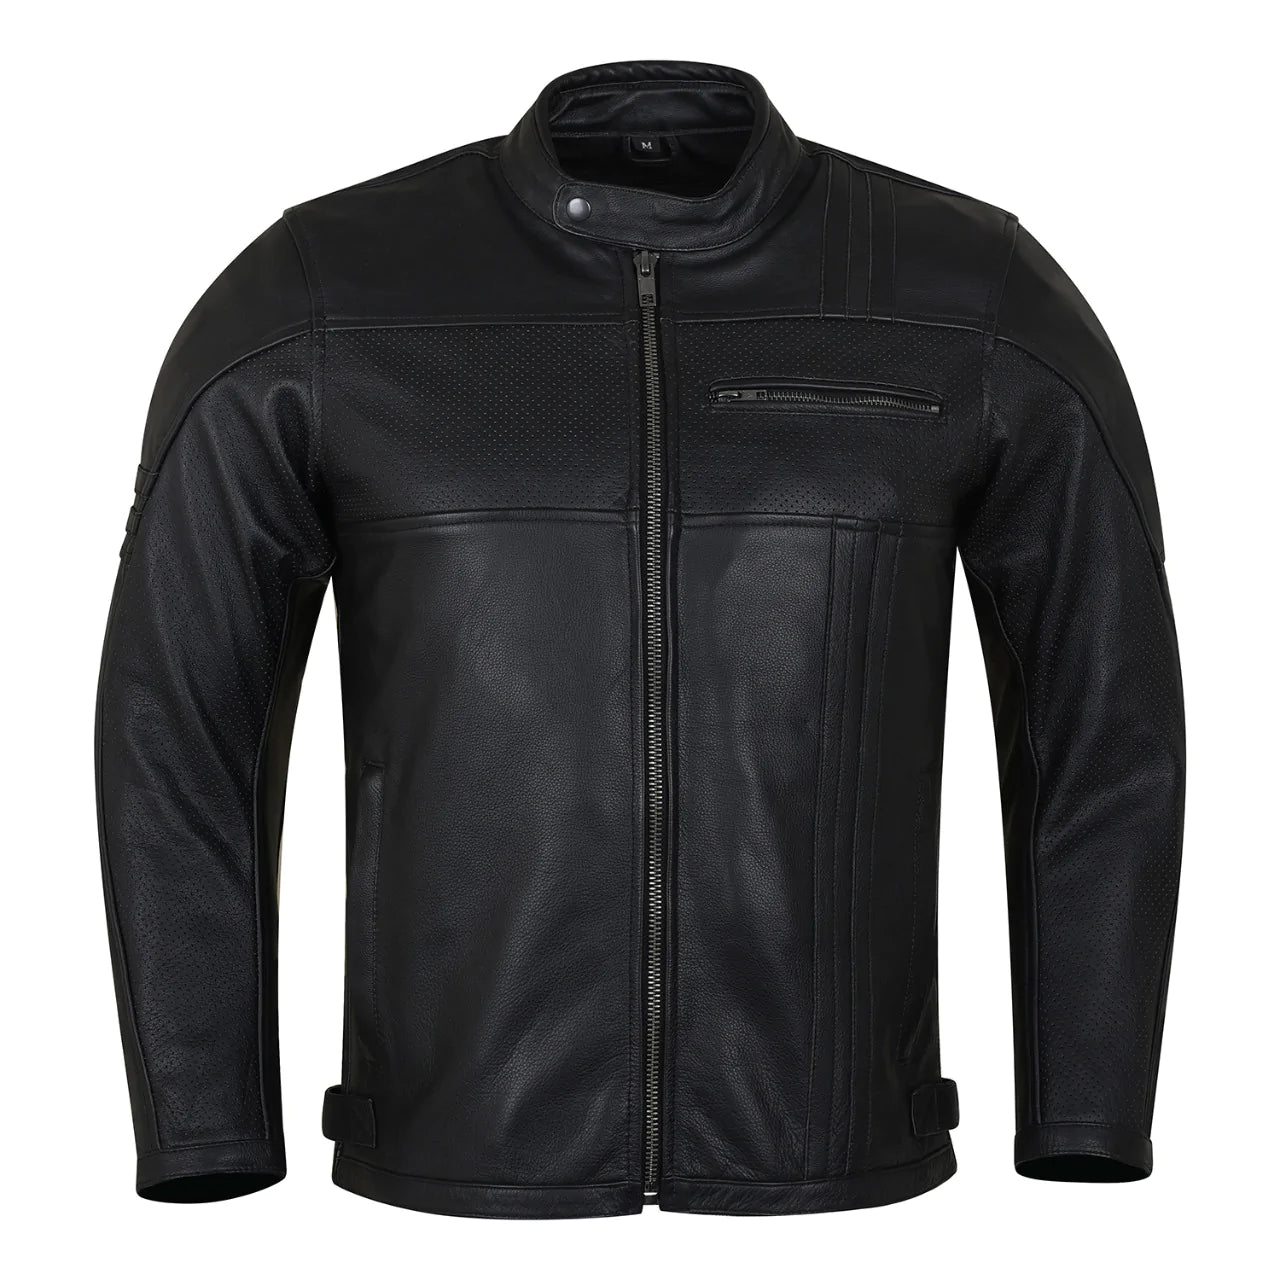 Vance Men's Commuter Cafe Racer Motorcycle Leather Jacket with Armor ...